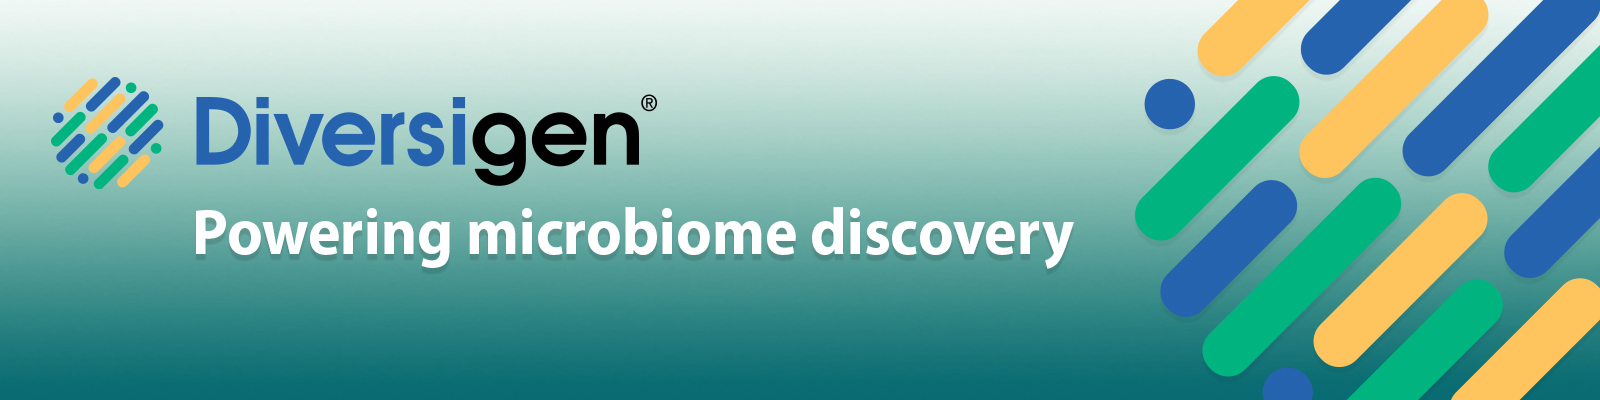 Microbiome services - Your complete solution for microbiome discovery
          